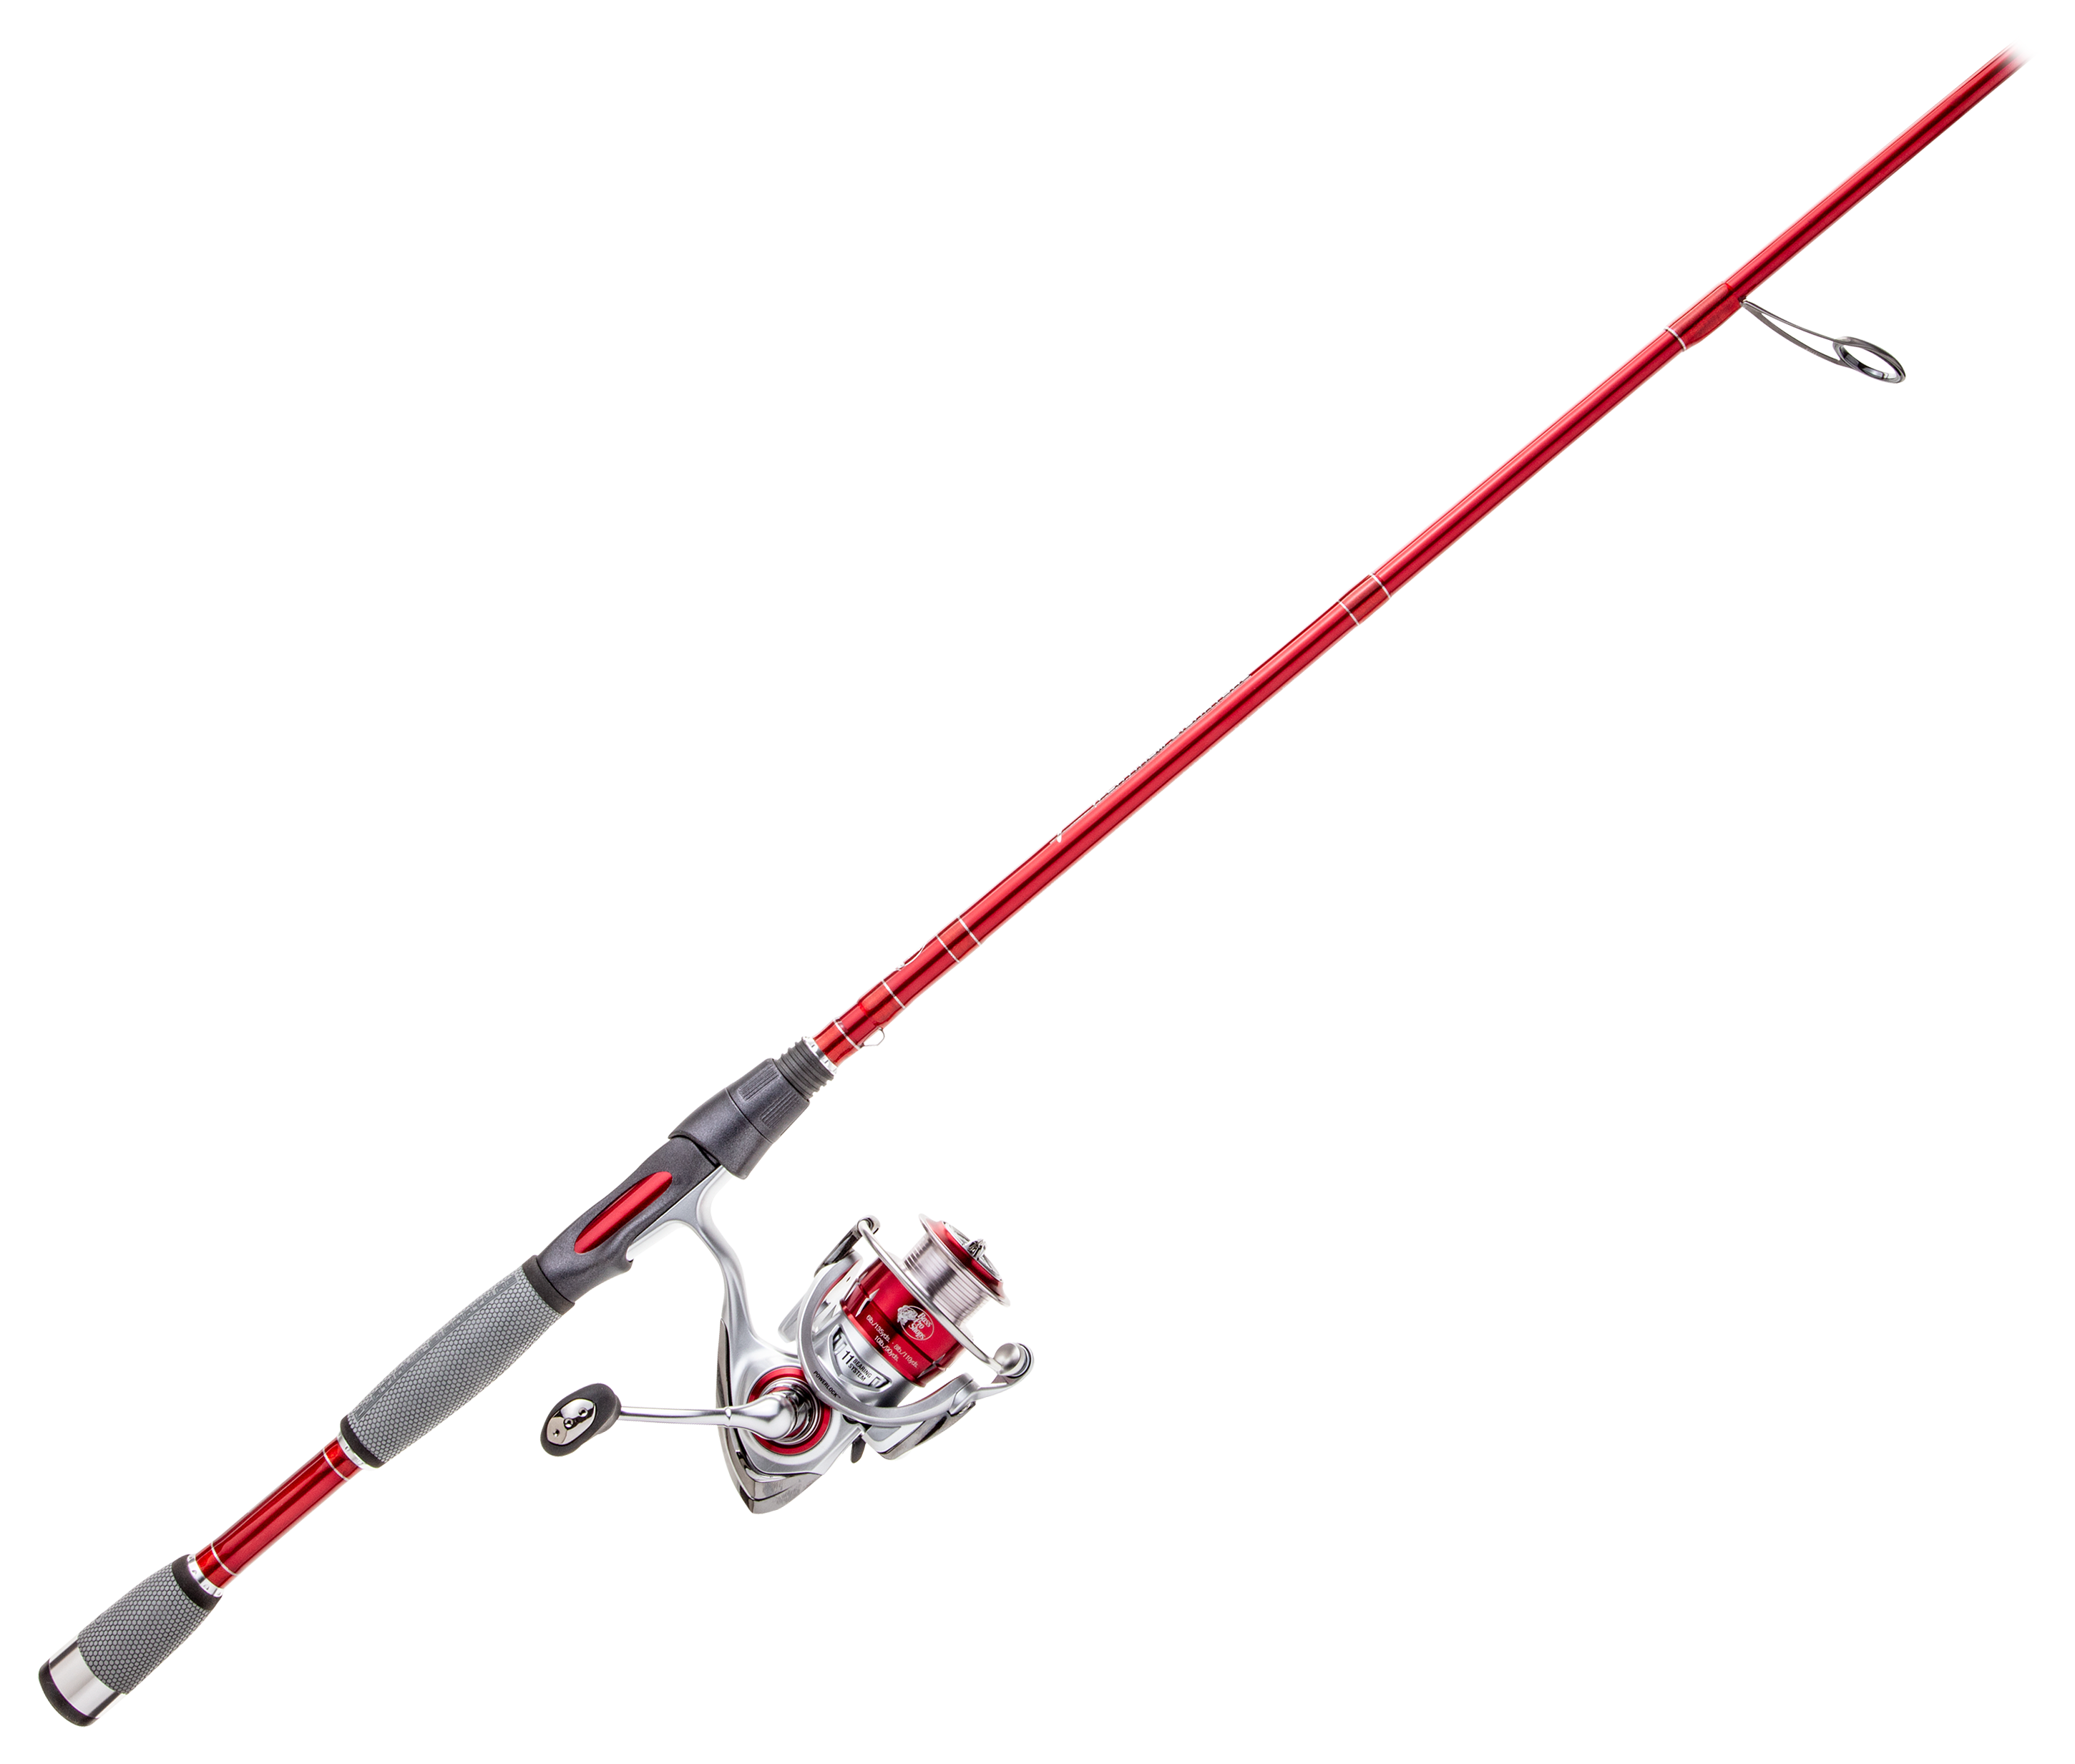 Bass Pro Shops Johnny Morris Platinum Signature Spinning Rod and Reel Combo - 3000 - 7 1  - Med - 6 0 1